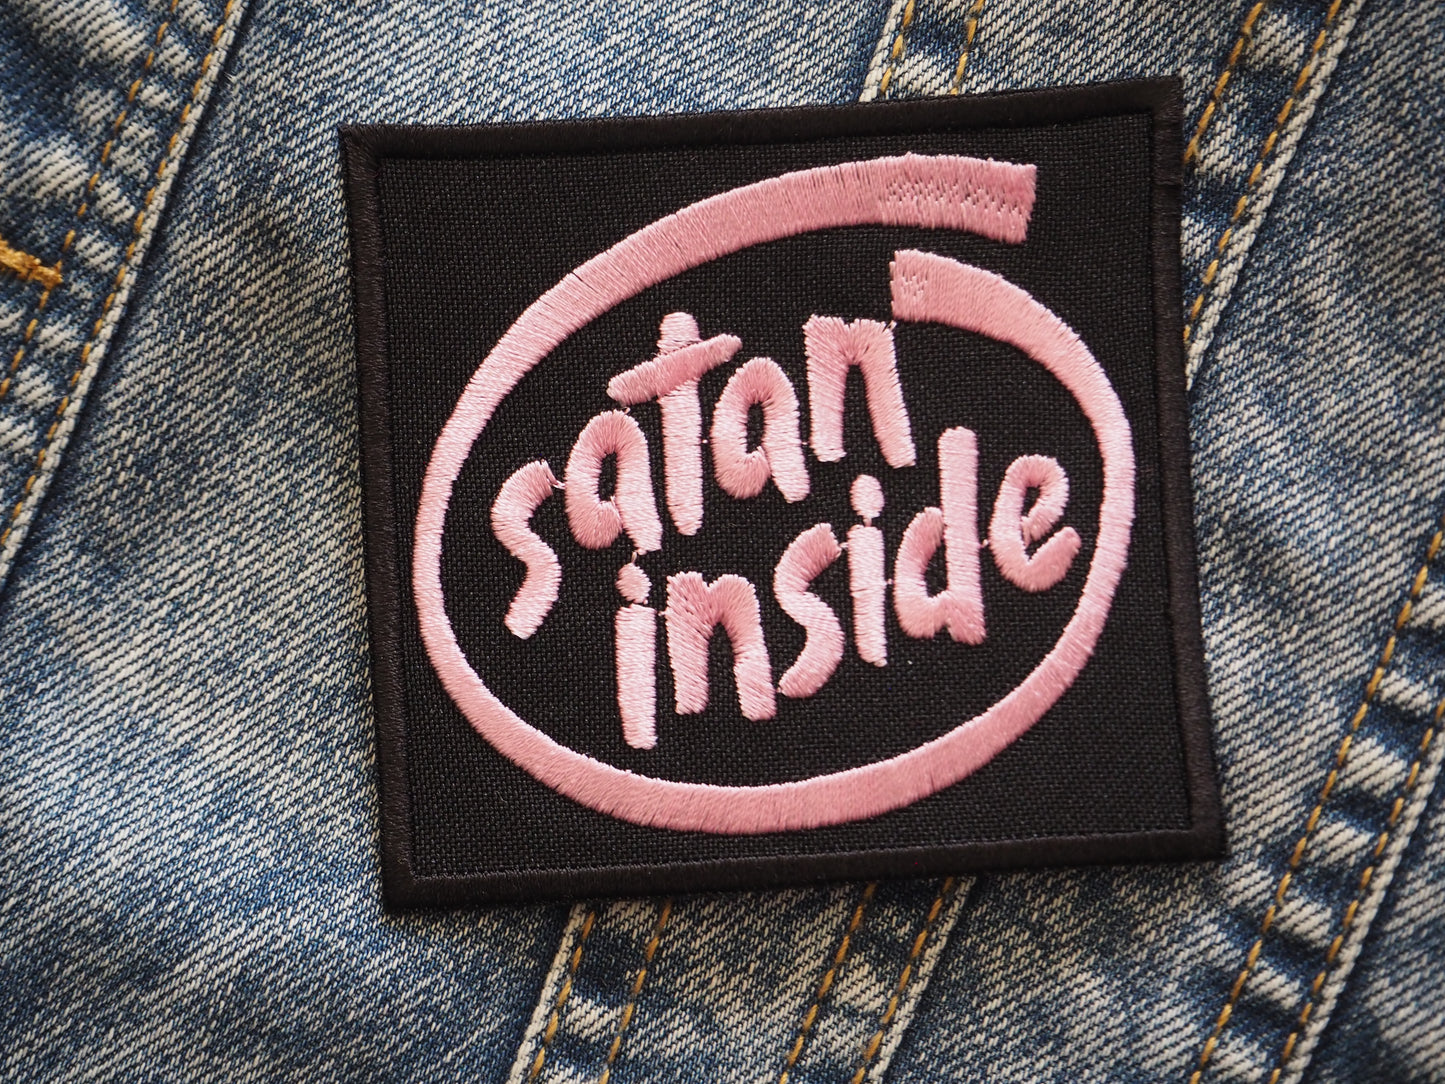 Satan Inside Embroidered Patch